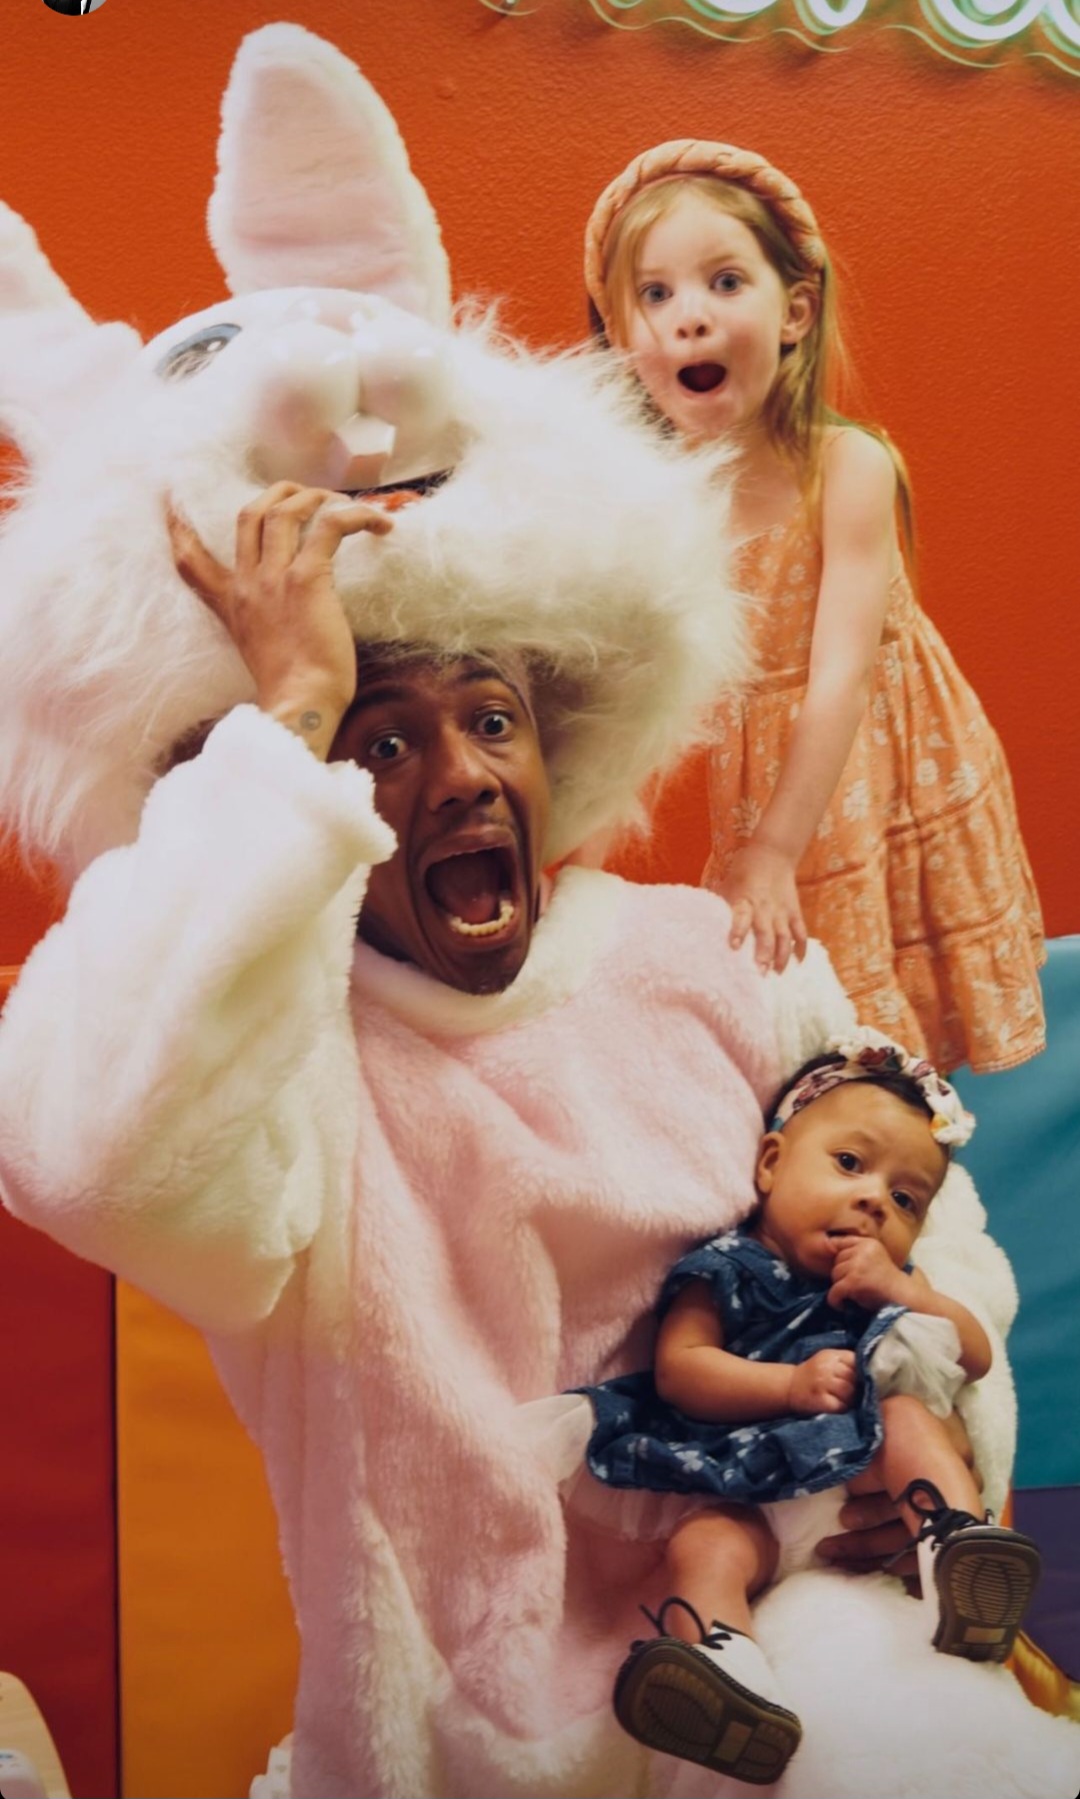 Reactions as Nick Cannon wears bunny costume to visit all his kids and their mothers for Easter photos